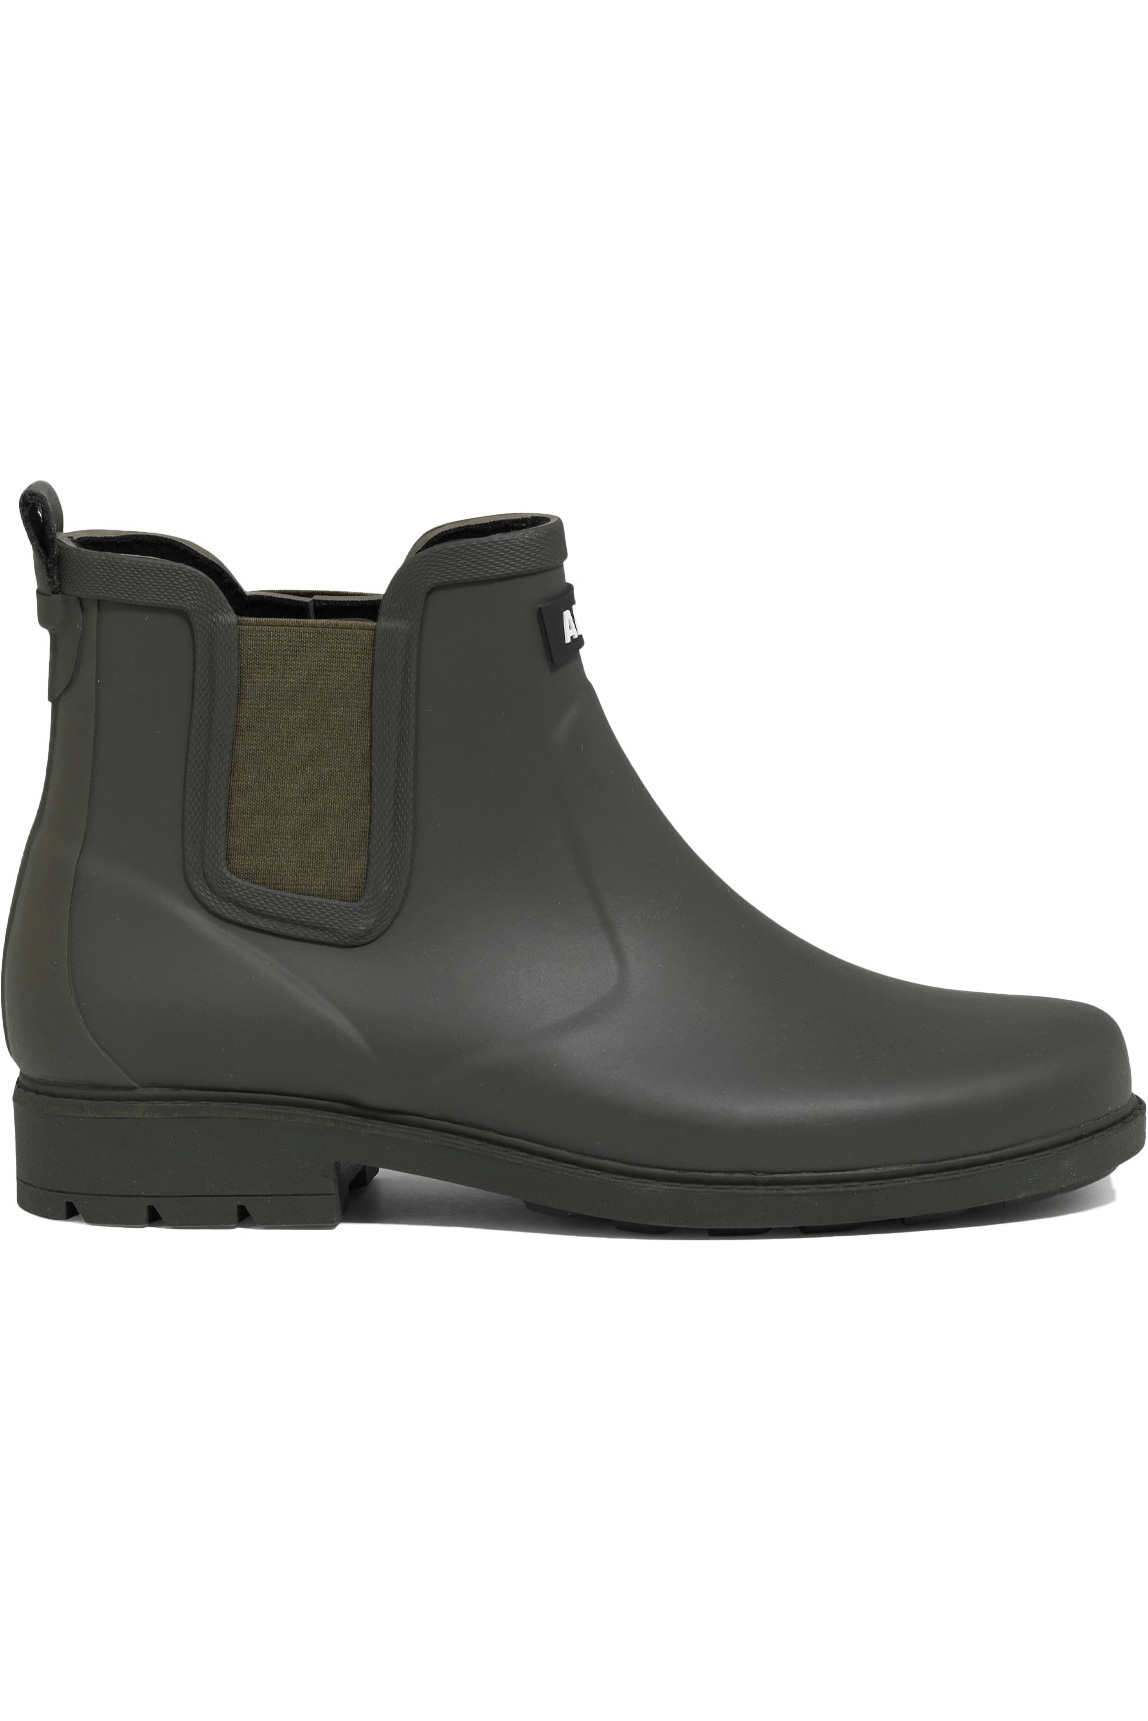 2023 Aigle Carville Wellie NA6026 - Very Kaki - Mens - Footwear | The Drillshed